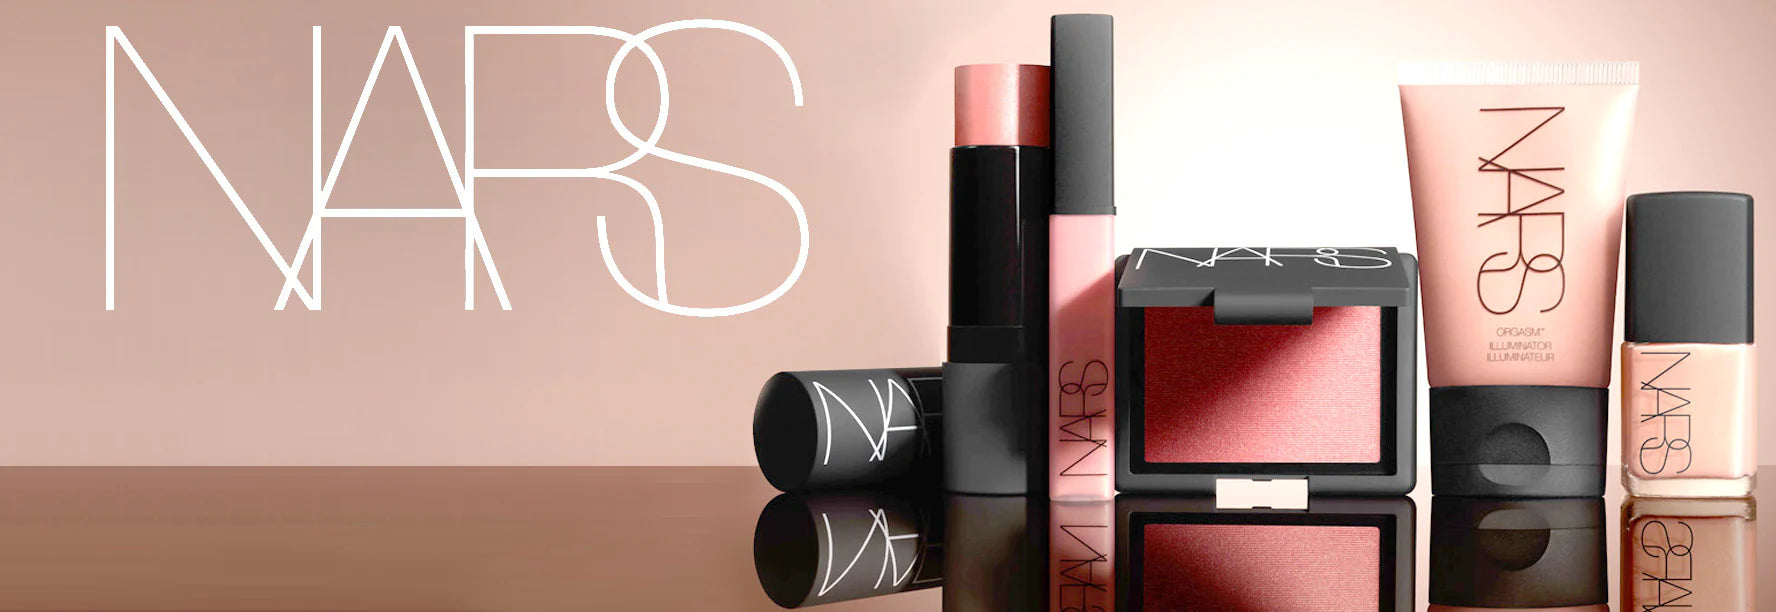 Nars Give Me Glam Cosmetics